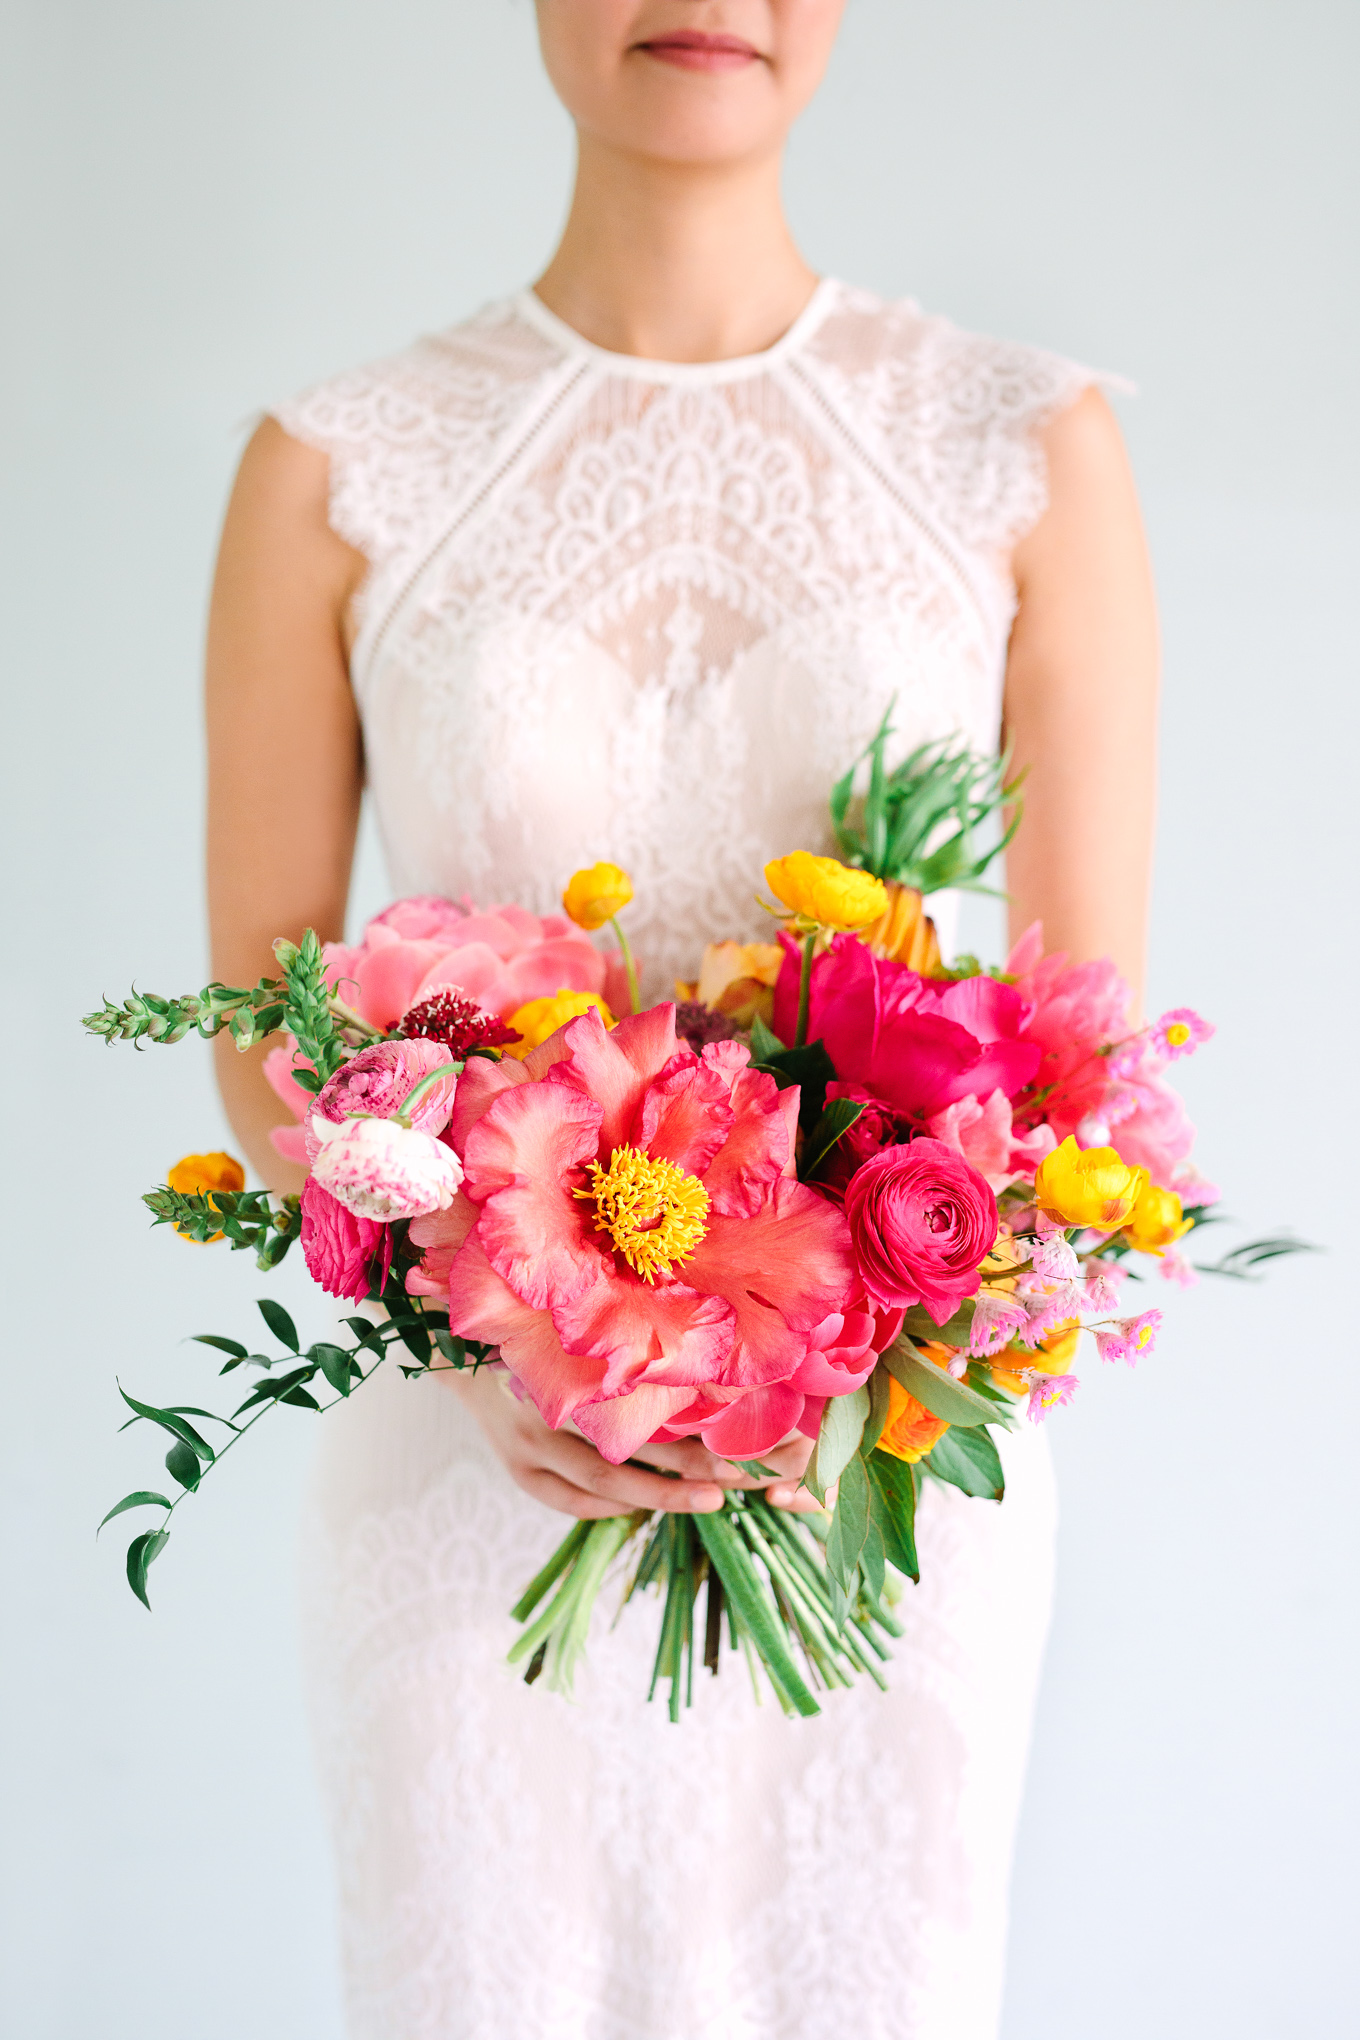 Pink peony wedding flowers | Beautiful bridal bouquet inspiration and advice | Colorful and elevated wedding photography for fun-loving couples in Southern California | #weddingflowers #weddingbouquet #bridebouquet #bouquetideas #uniquebouquet   Source: Mary Costa Photography | Los Angeles